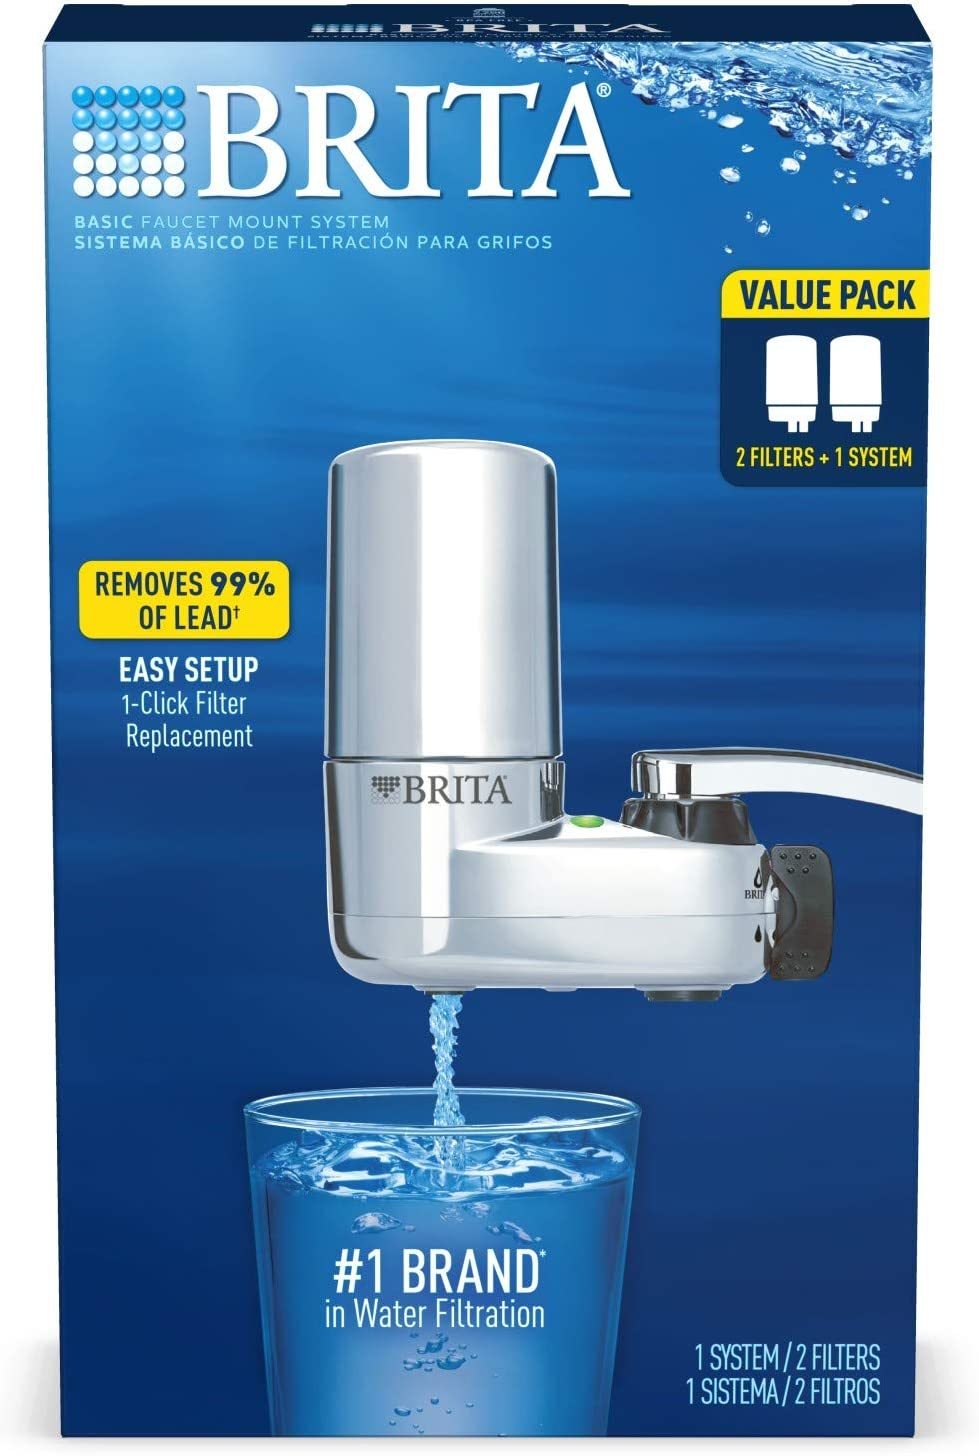 Brita Tap Water Filter System, Water Faucet Filtration System, Basic, Chrome - $41.99